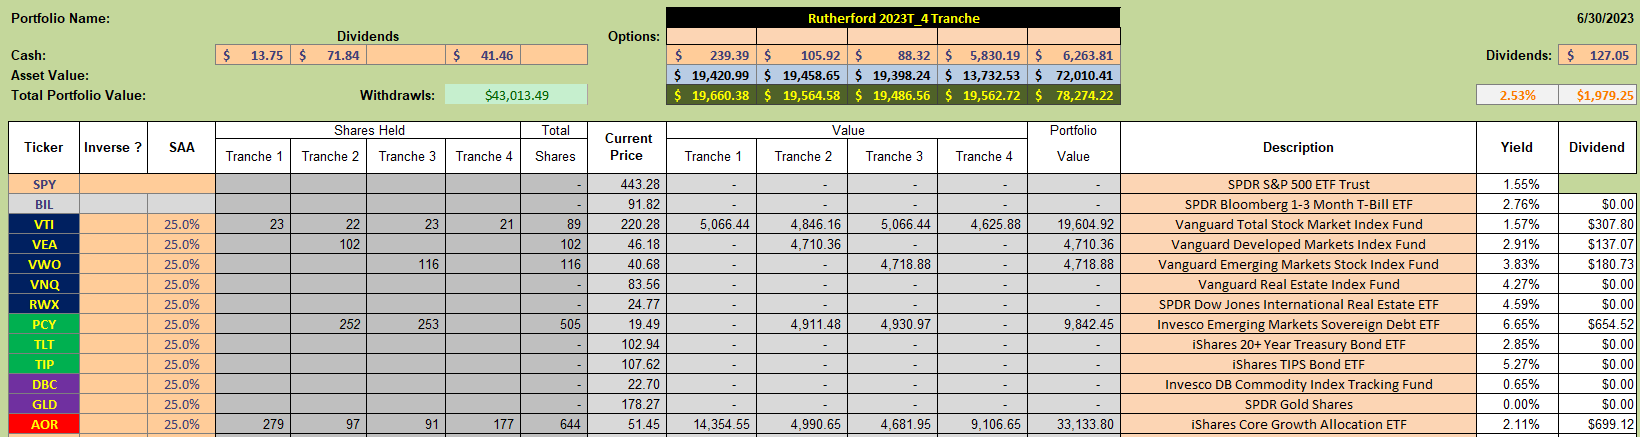 Rutherford Portfolio Review (Tranche 1): 30 June 2023 4